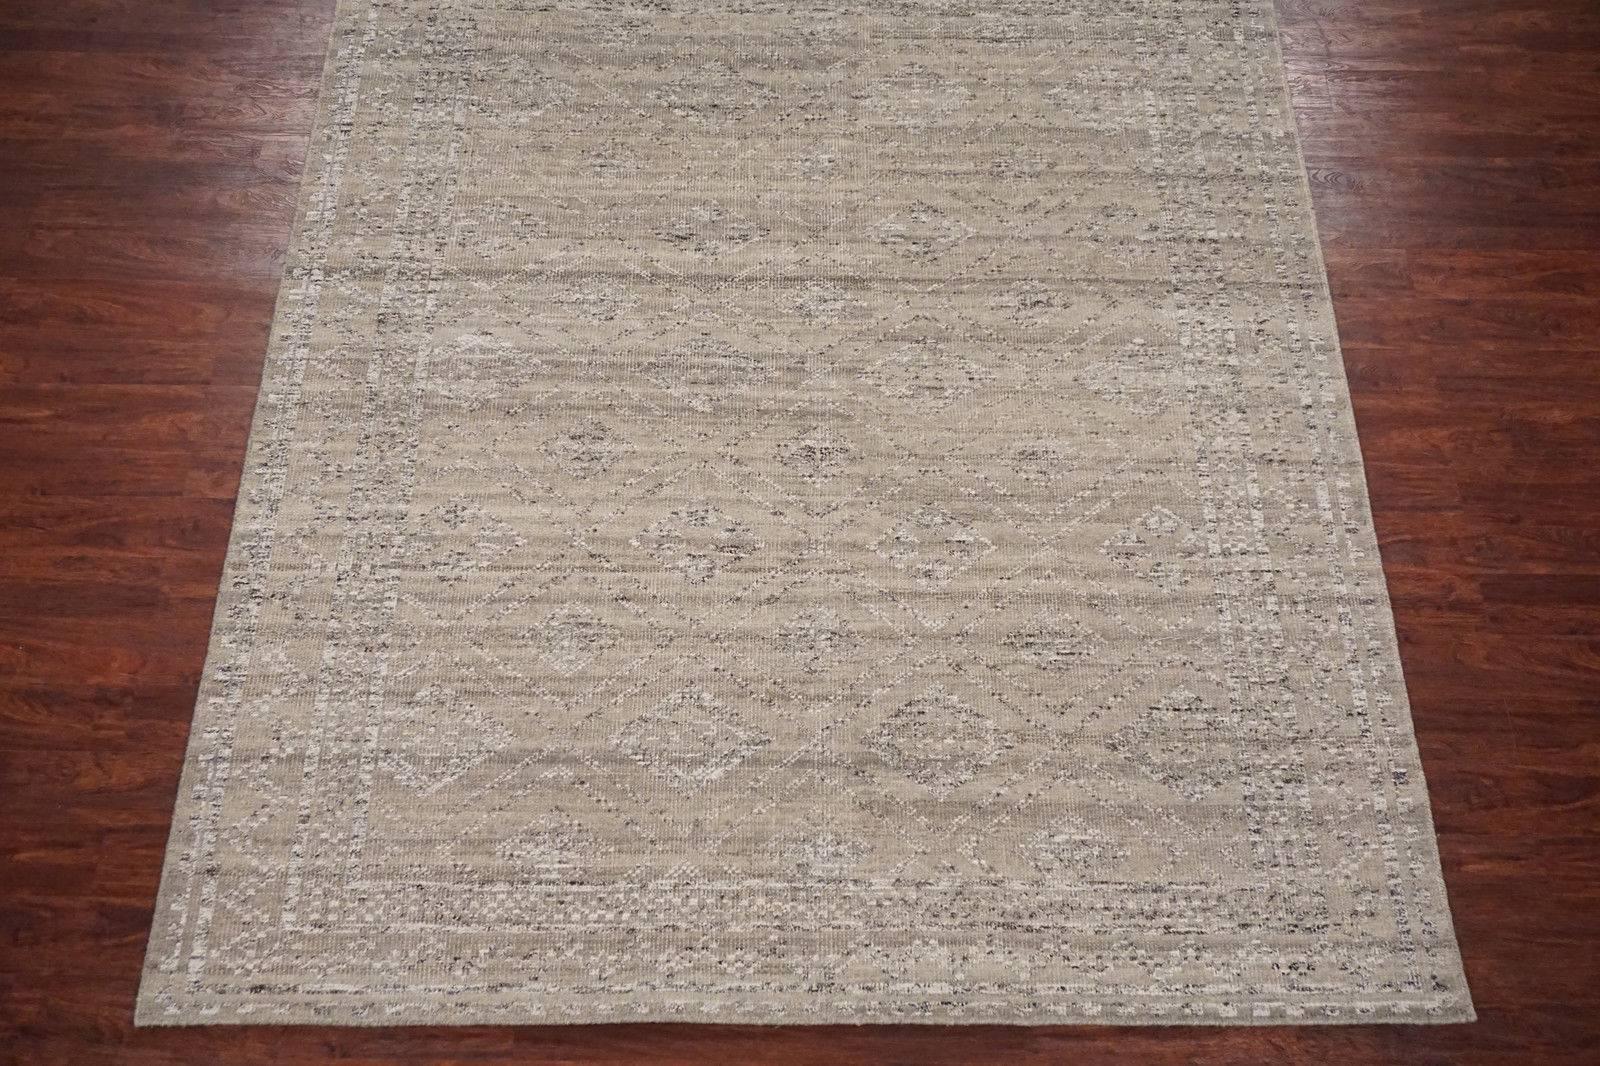 Modern Moroccan design rug

circa 2015

Measures: 8' x 10'

Hand-knotted wool pile, cotton foundation

Field color: Beige
Border color: Light-brown
Accent color: Ivory and brown.